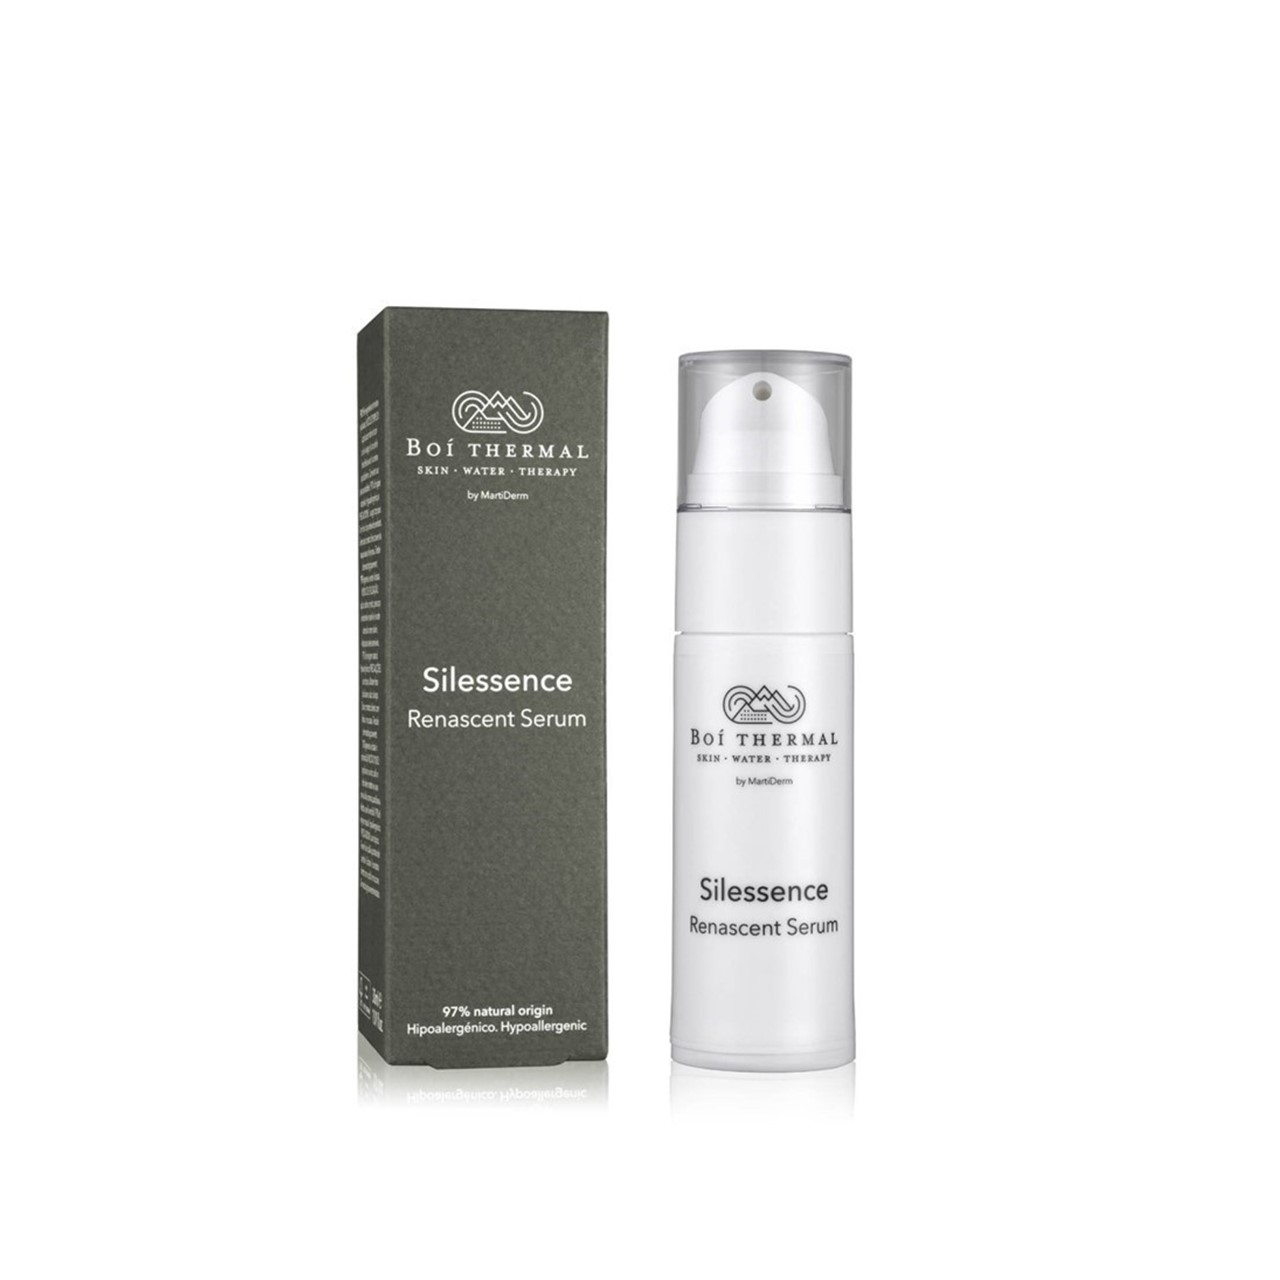 Boí Thermal Silessence Renascent Serum 30ml